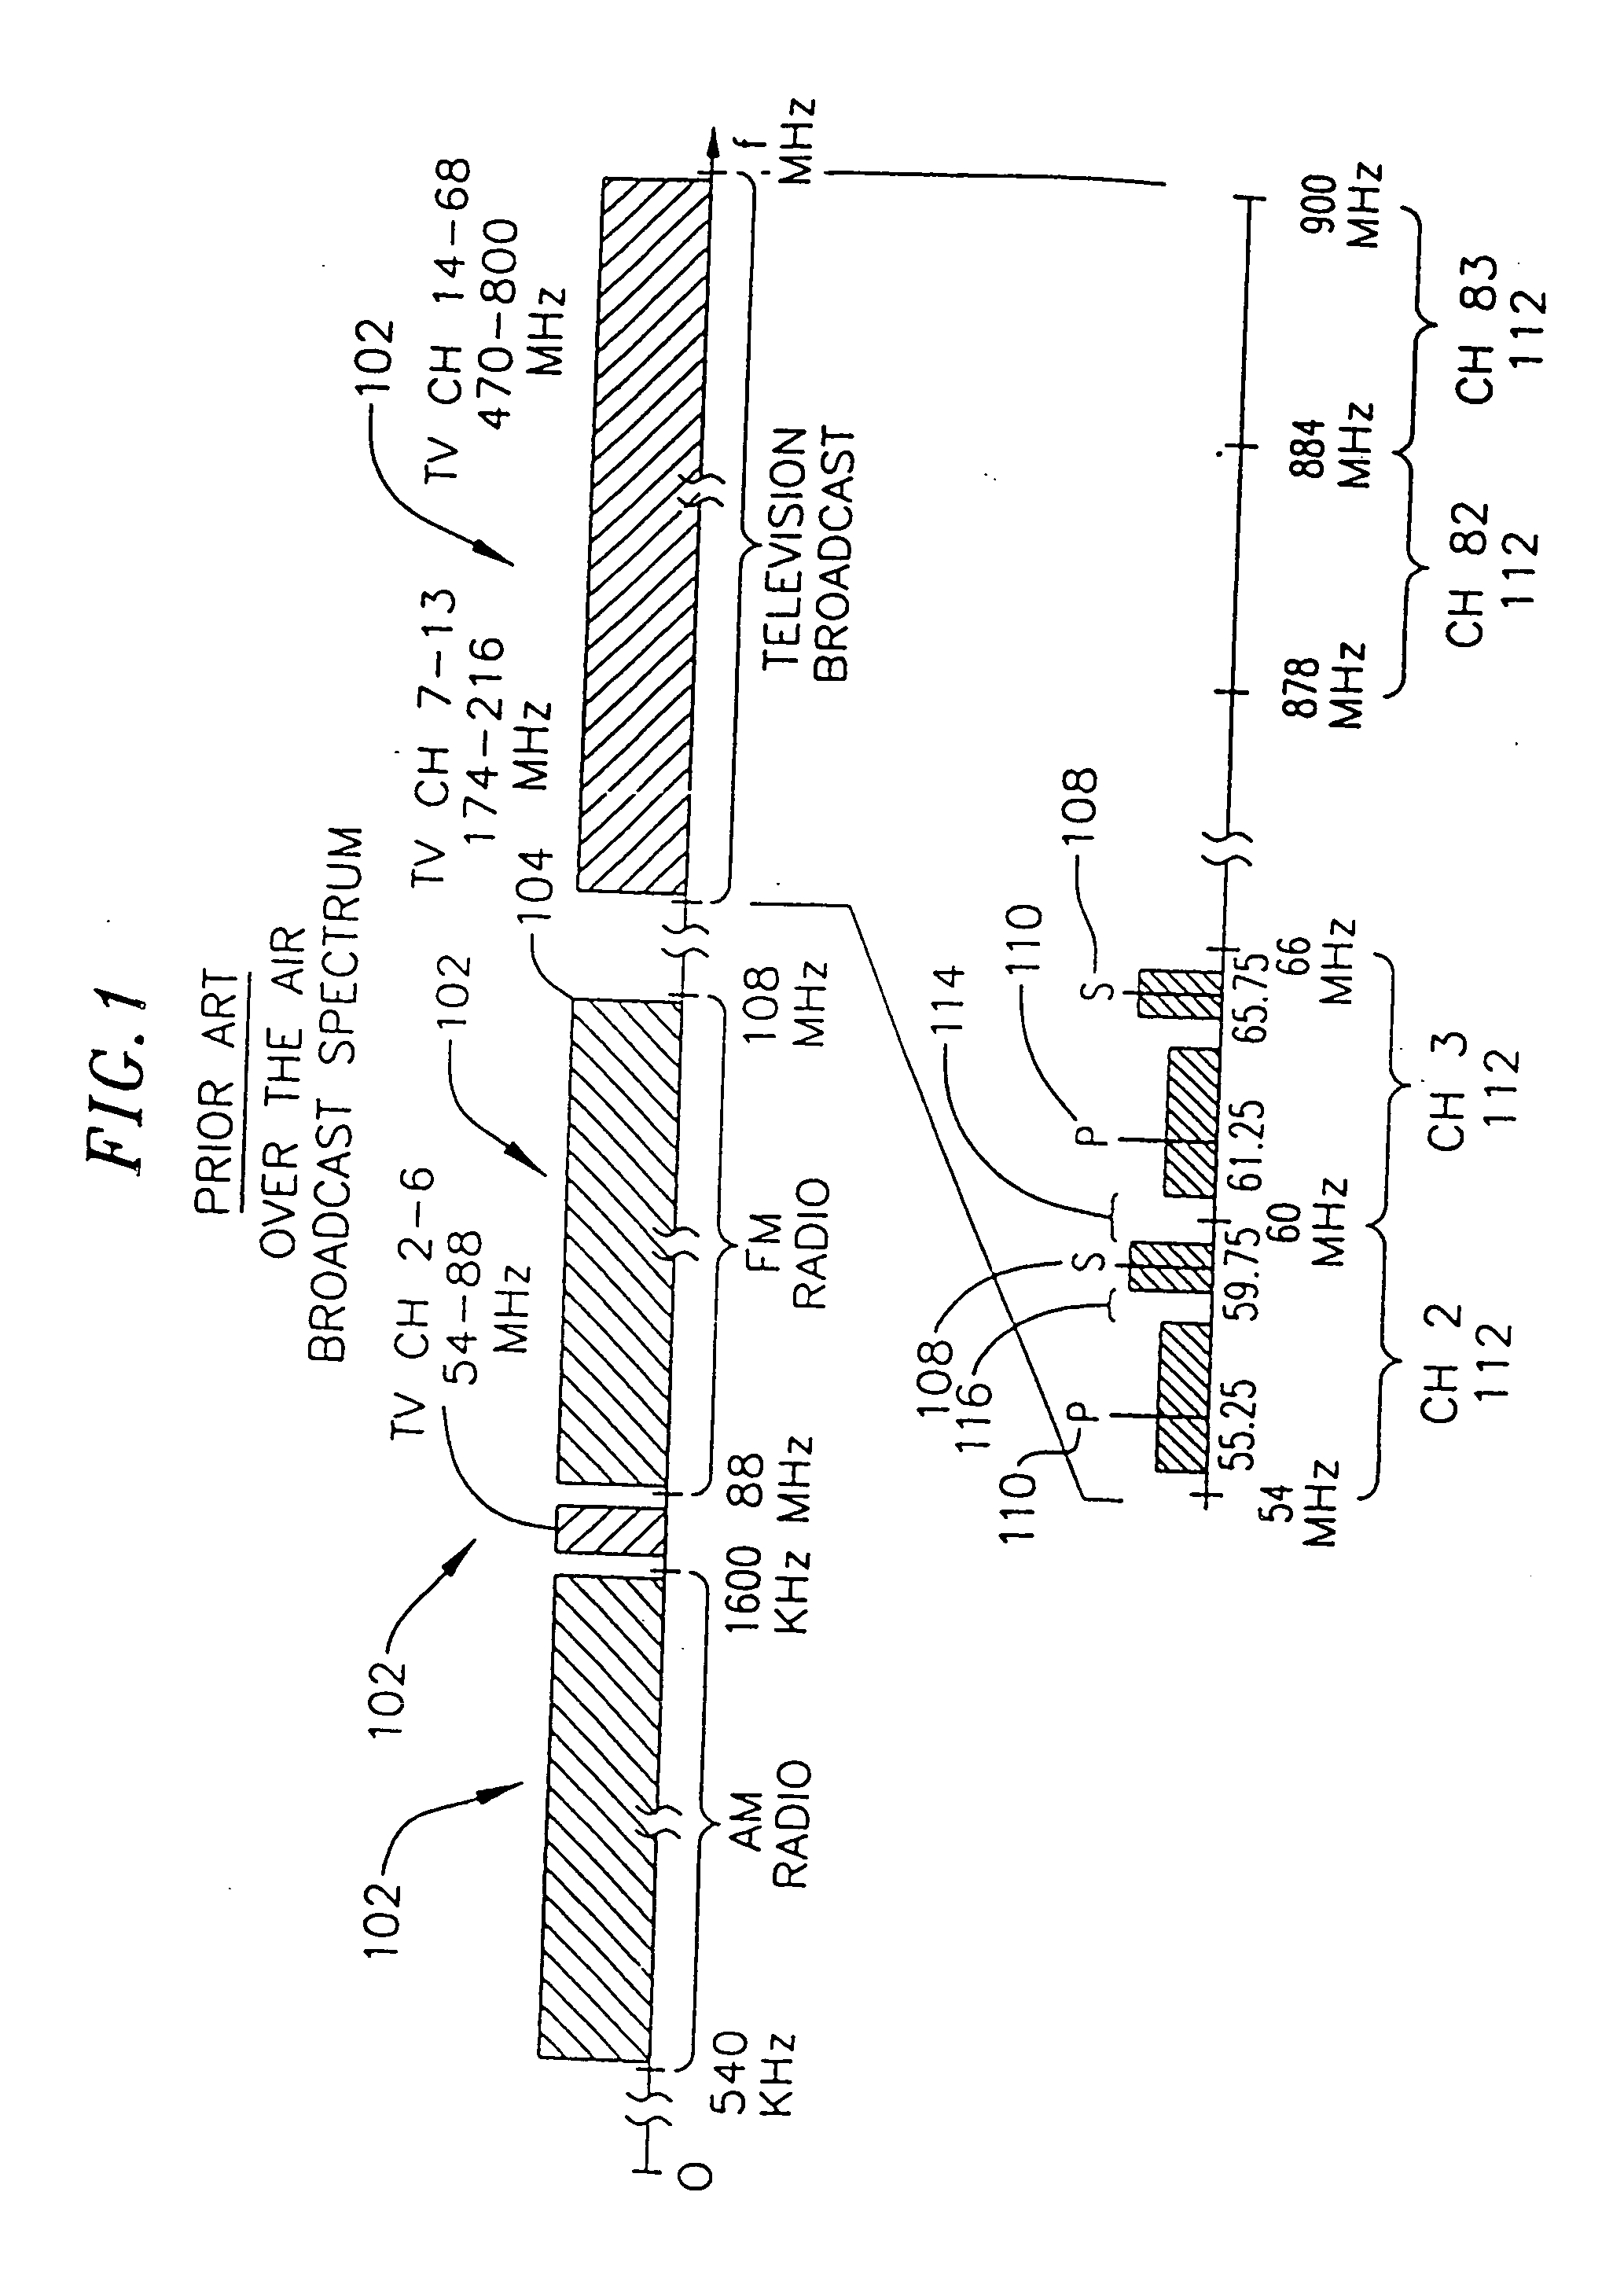 System and method for linearizing a CMOS differential pair